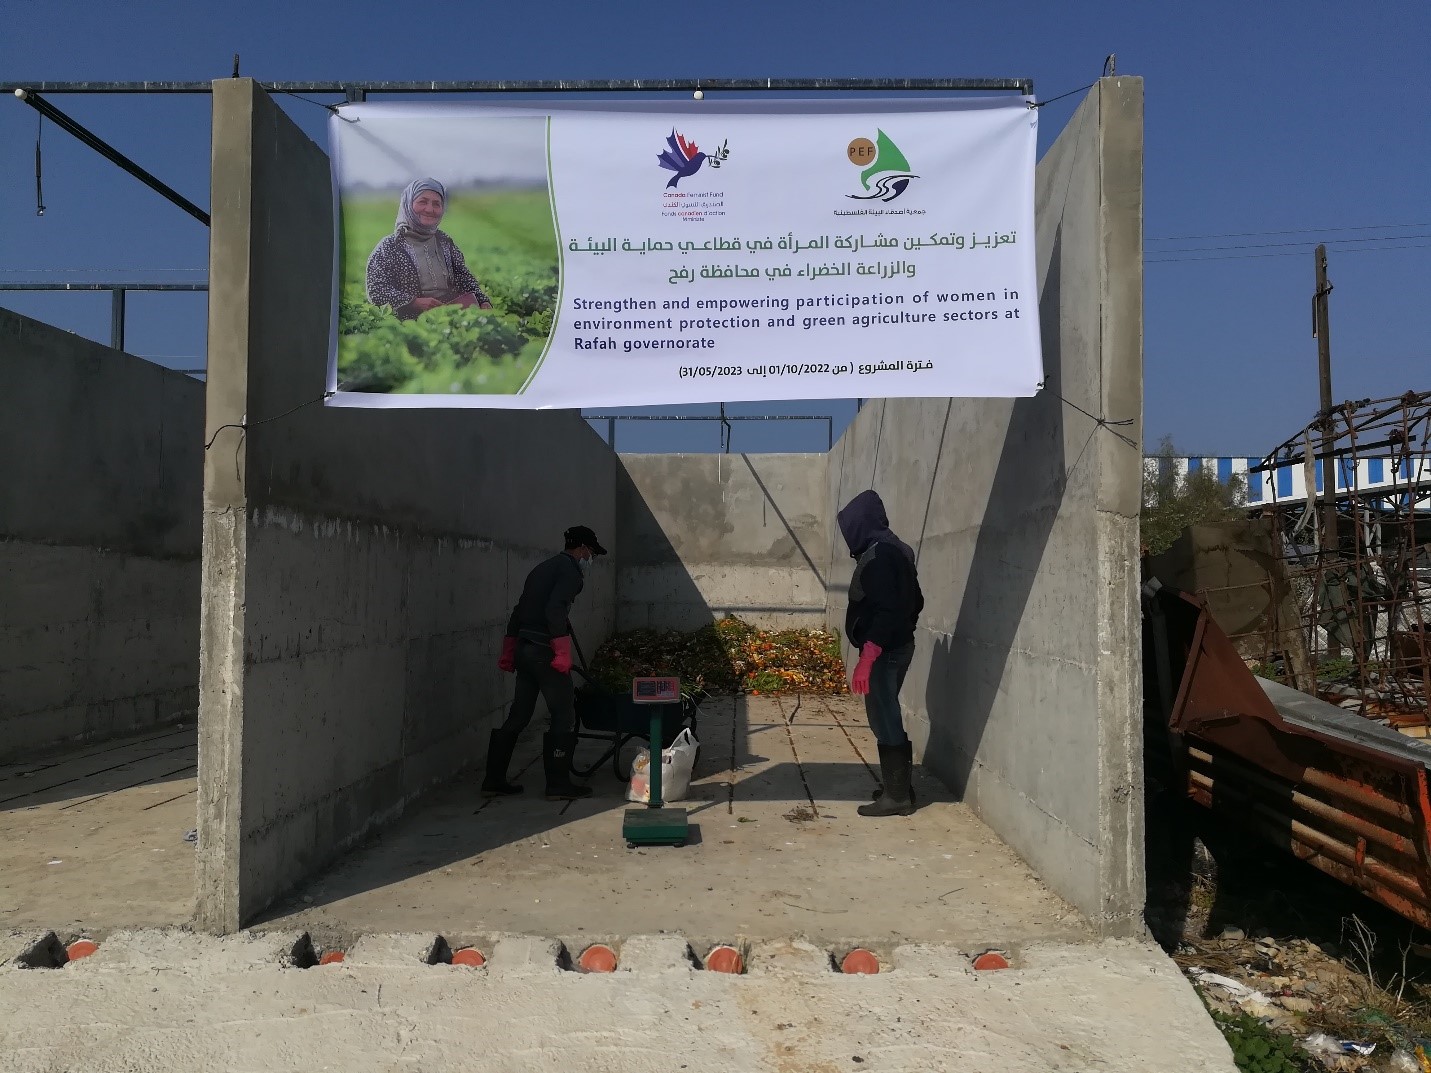 ” Strengthen and empowering participation of women in environment protection and green agriculture sectors at   Rafah governorate”